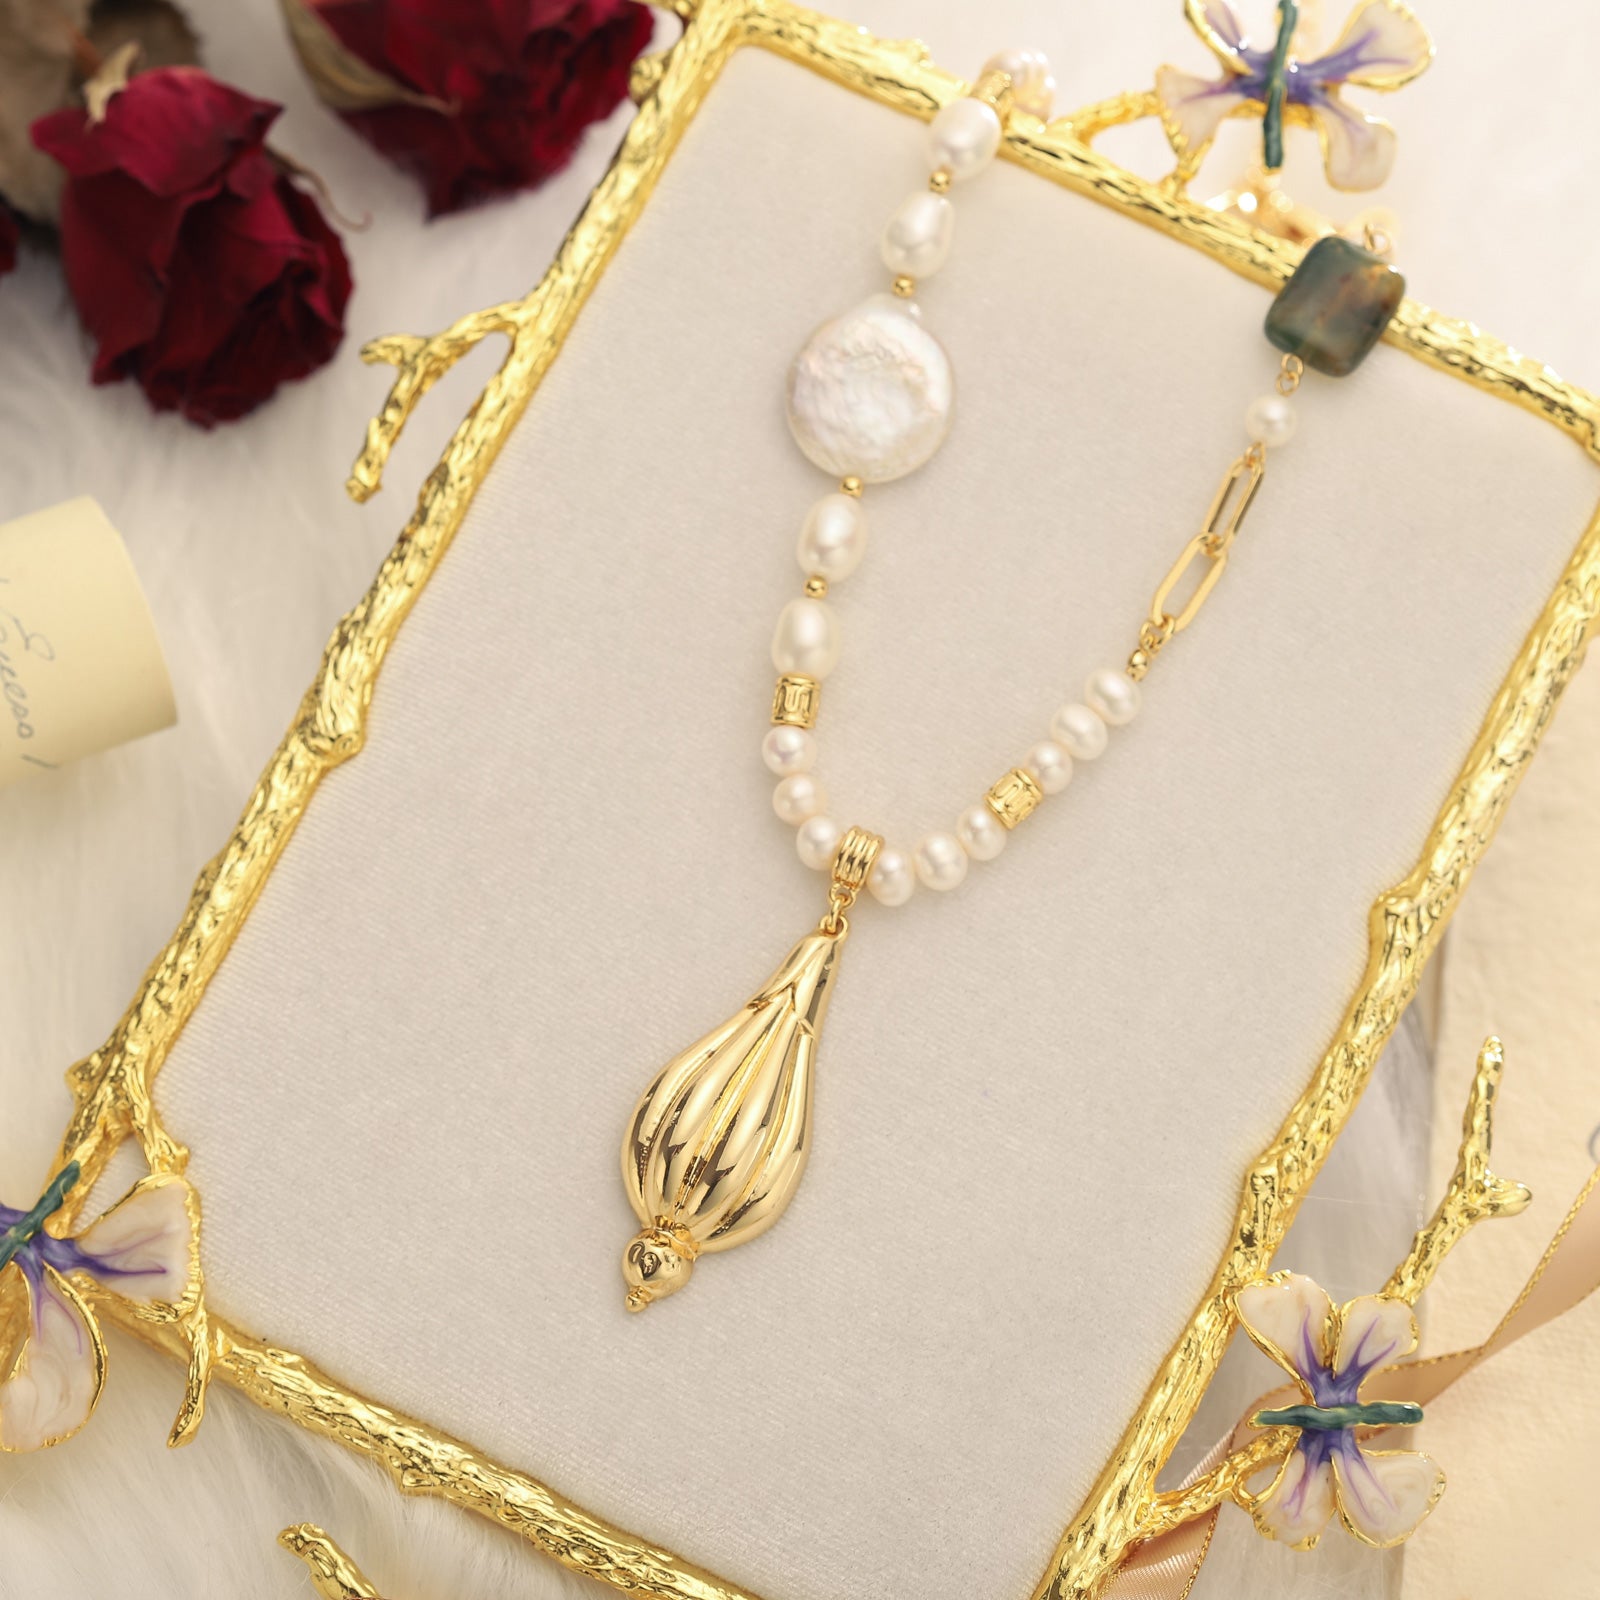 Baroque Daisy Bud Pearl Chain Necklace